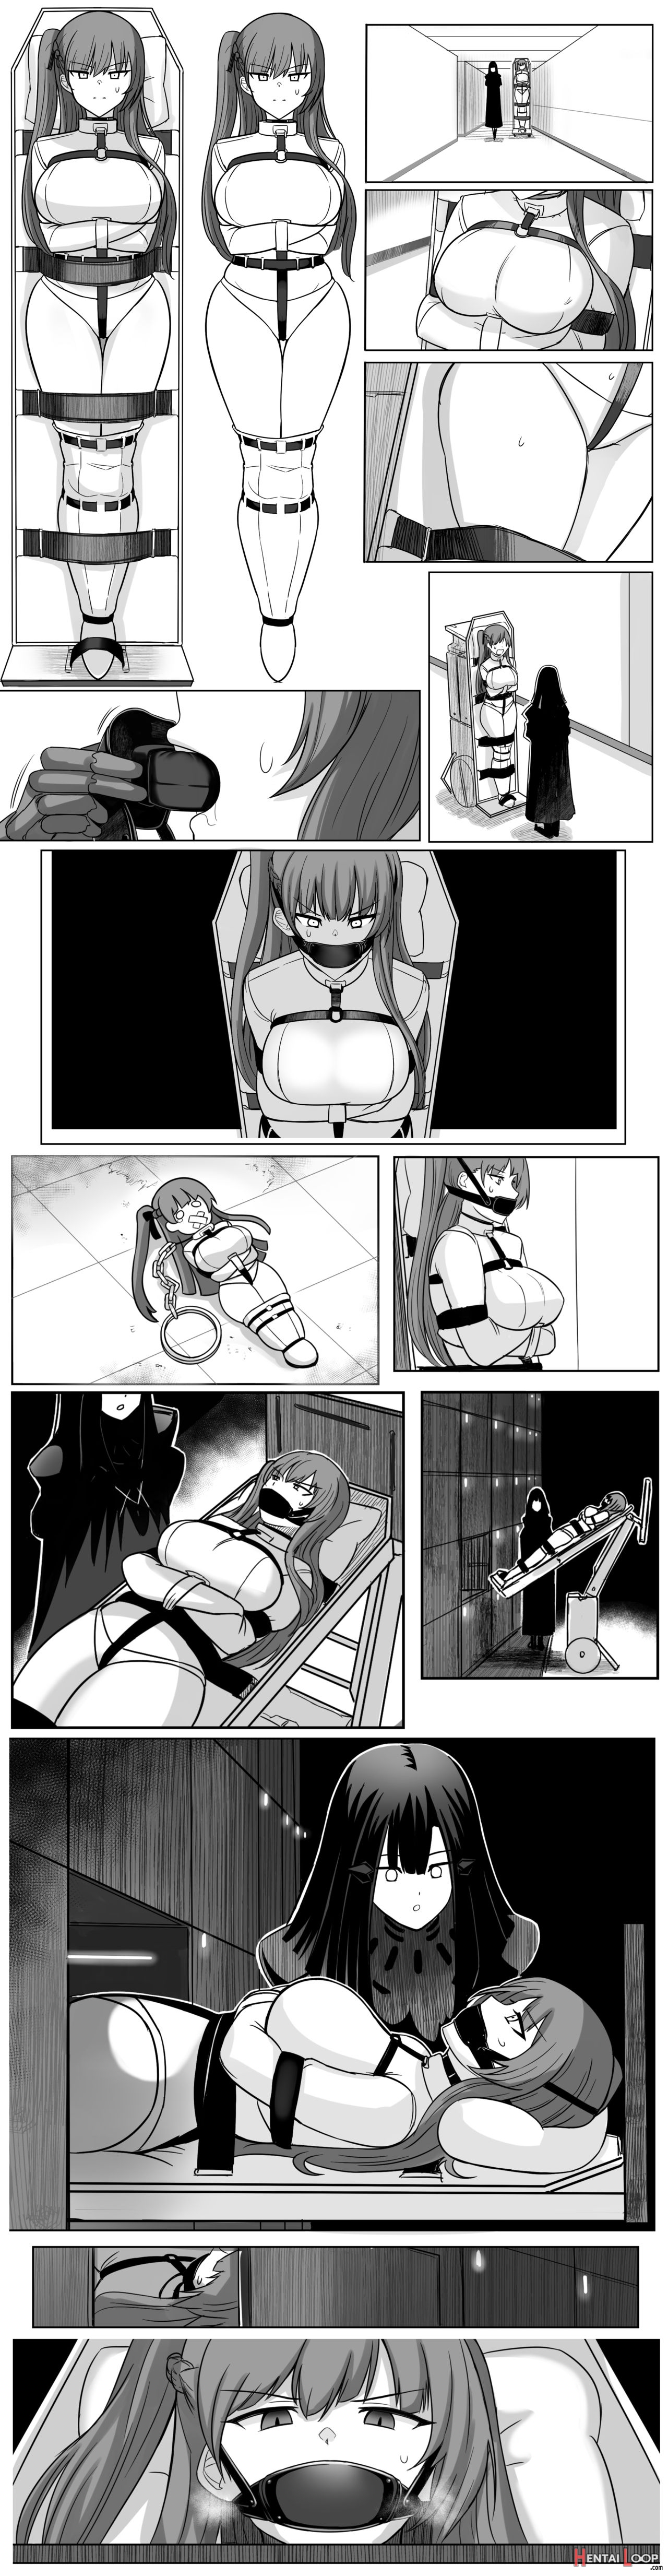 Lost Dolls page 10